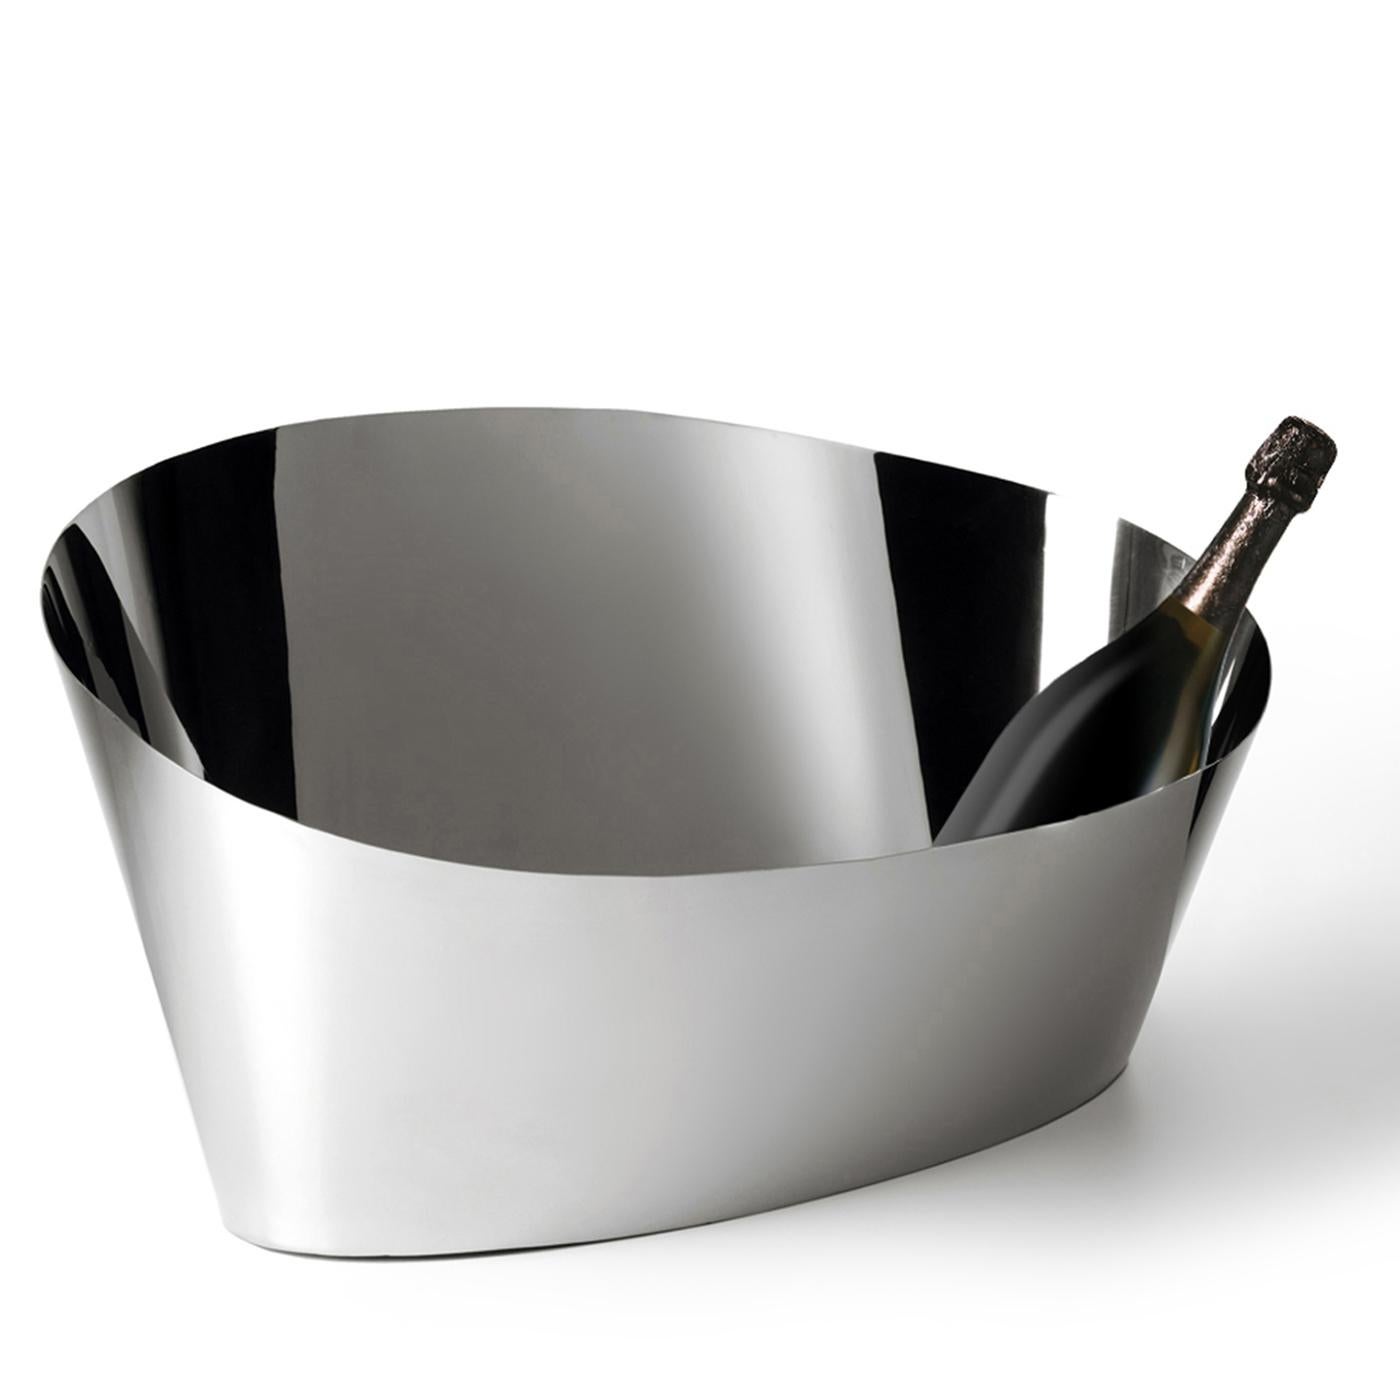 Pond is a steel champagne holder that can also be used as an ice bucket, imbuing every space with a sophisticated and timeless accent. Designed by Aldo Cibic, this piece was crafted of steel with a polished finish that plays with the surrounding